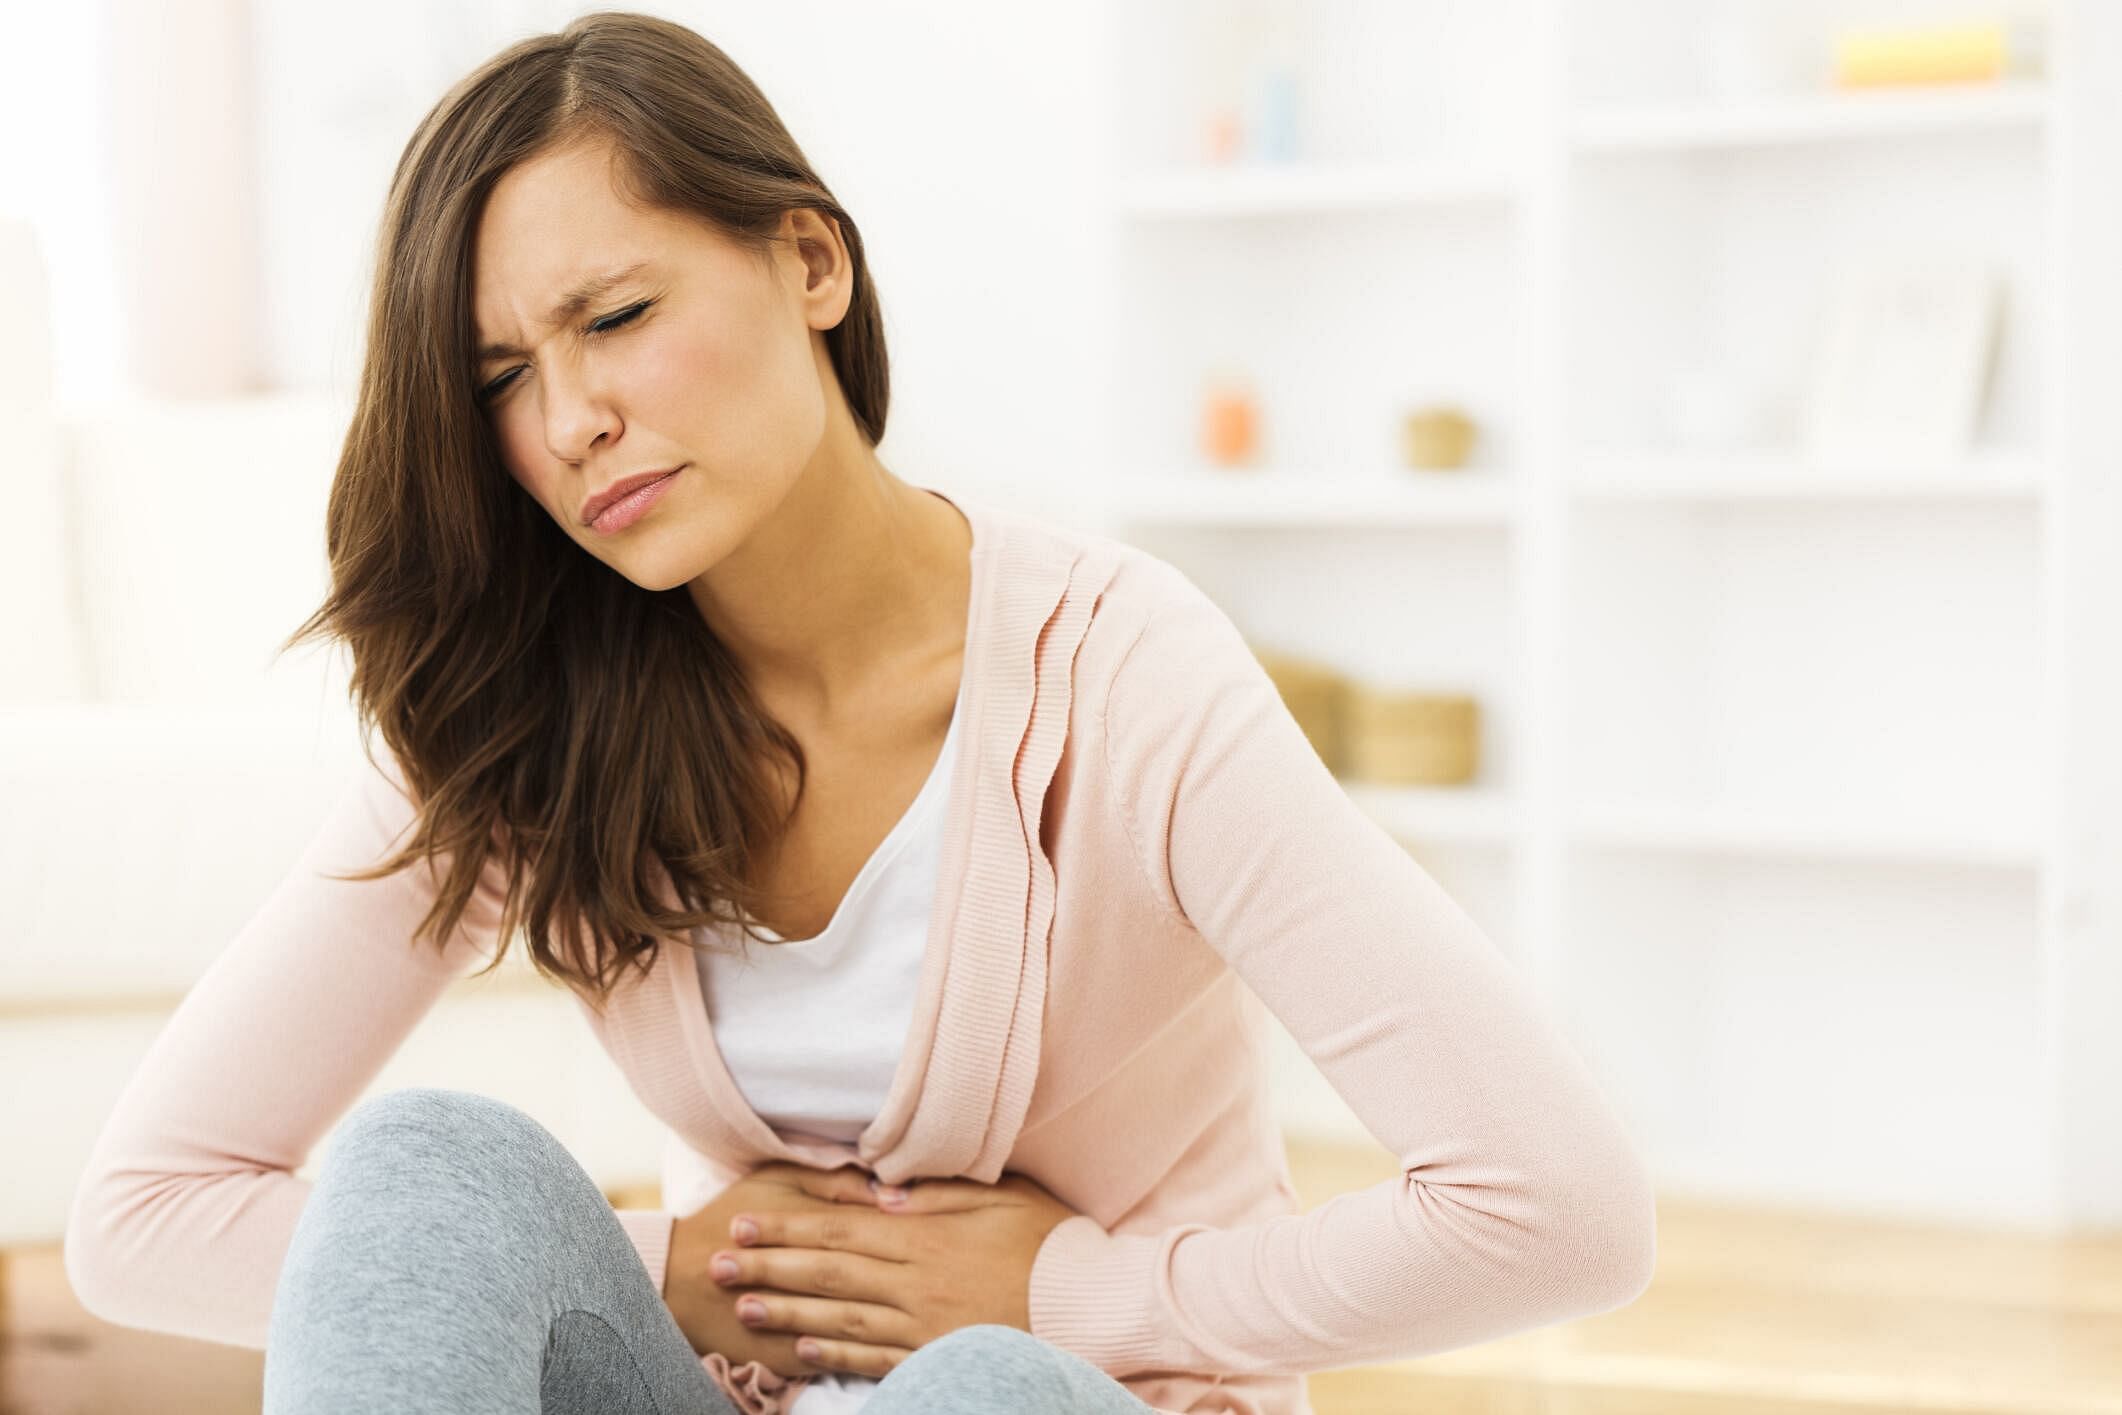 Dealing with Stomach Aches with Home Remedies